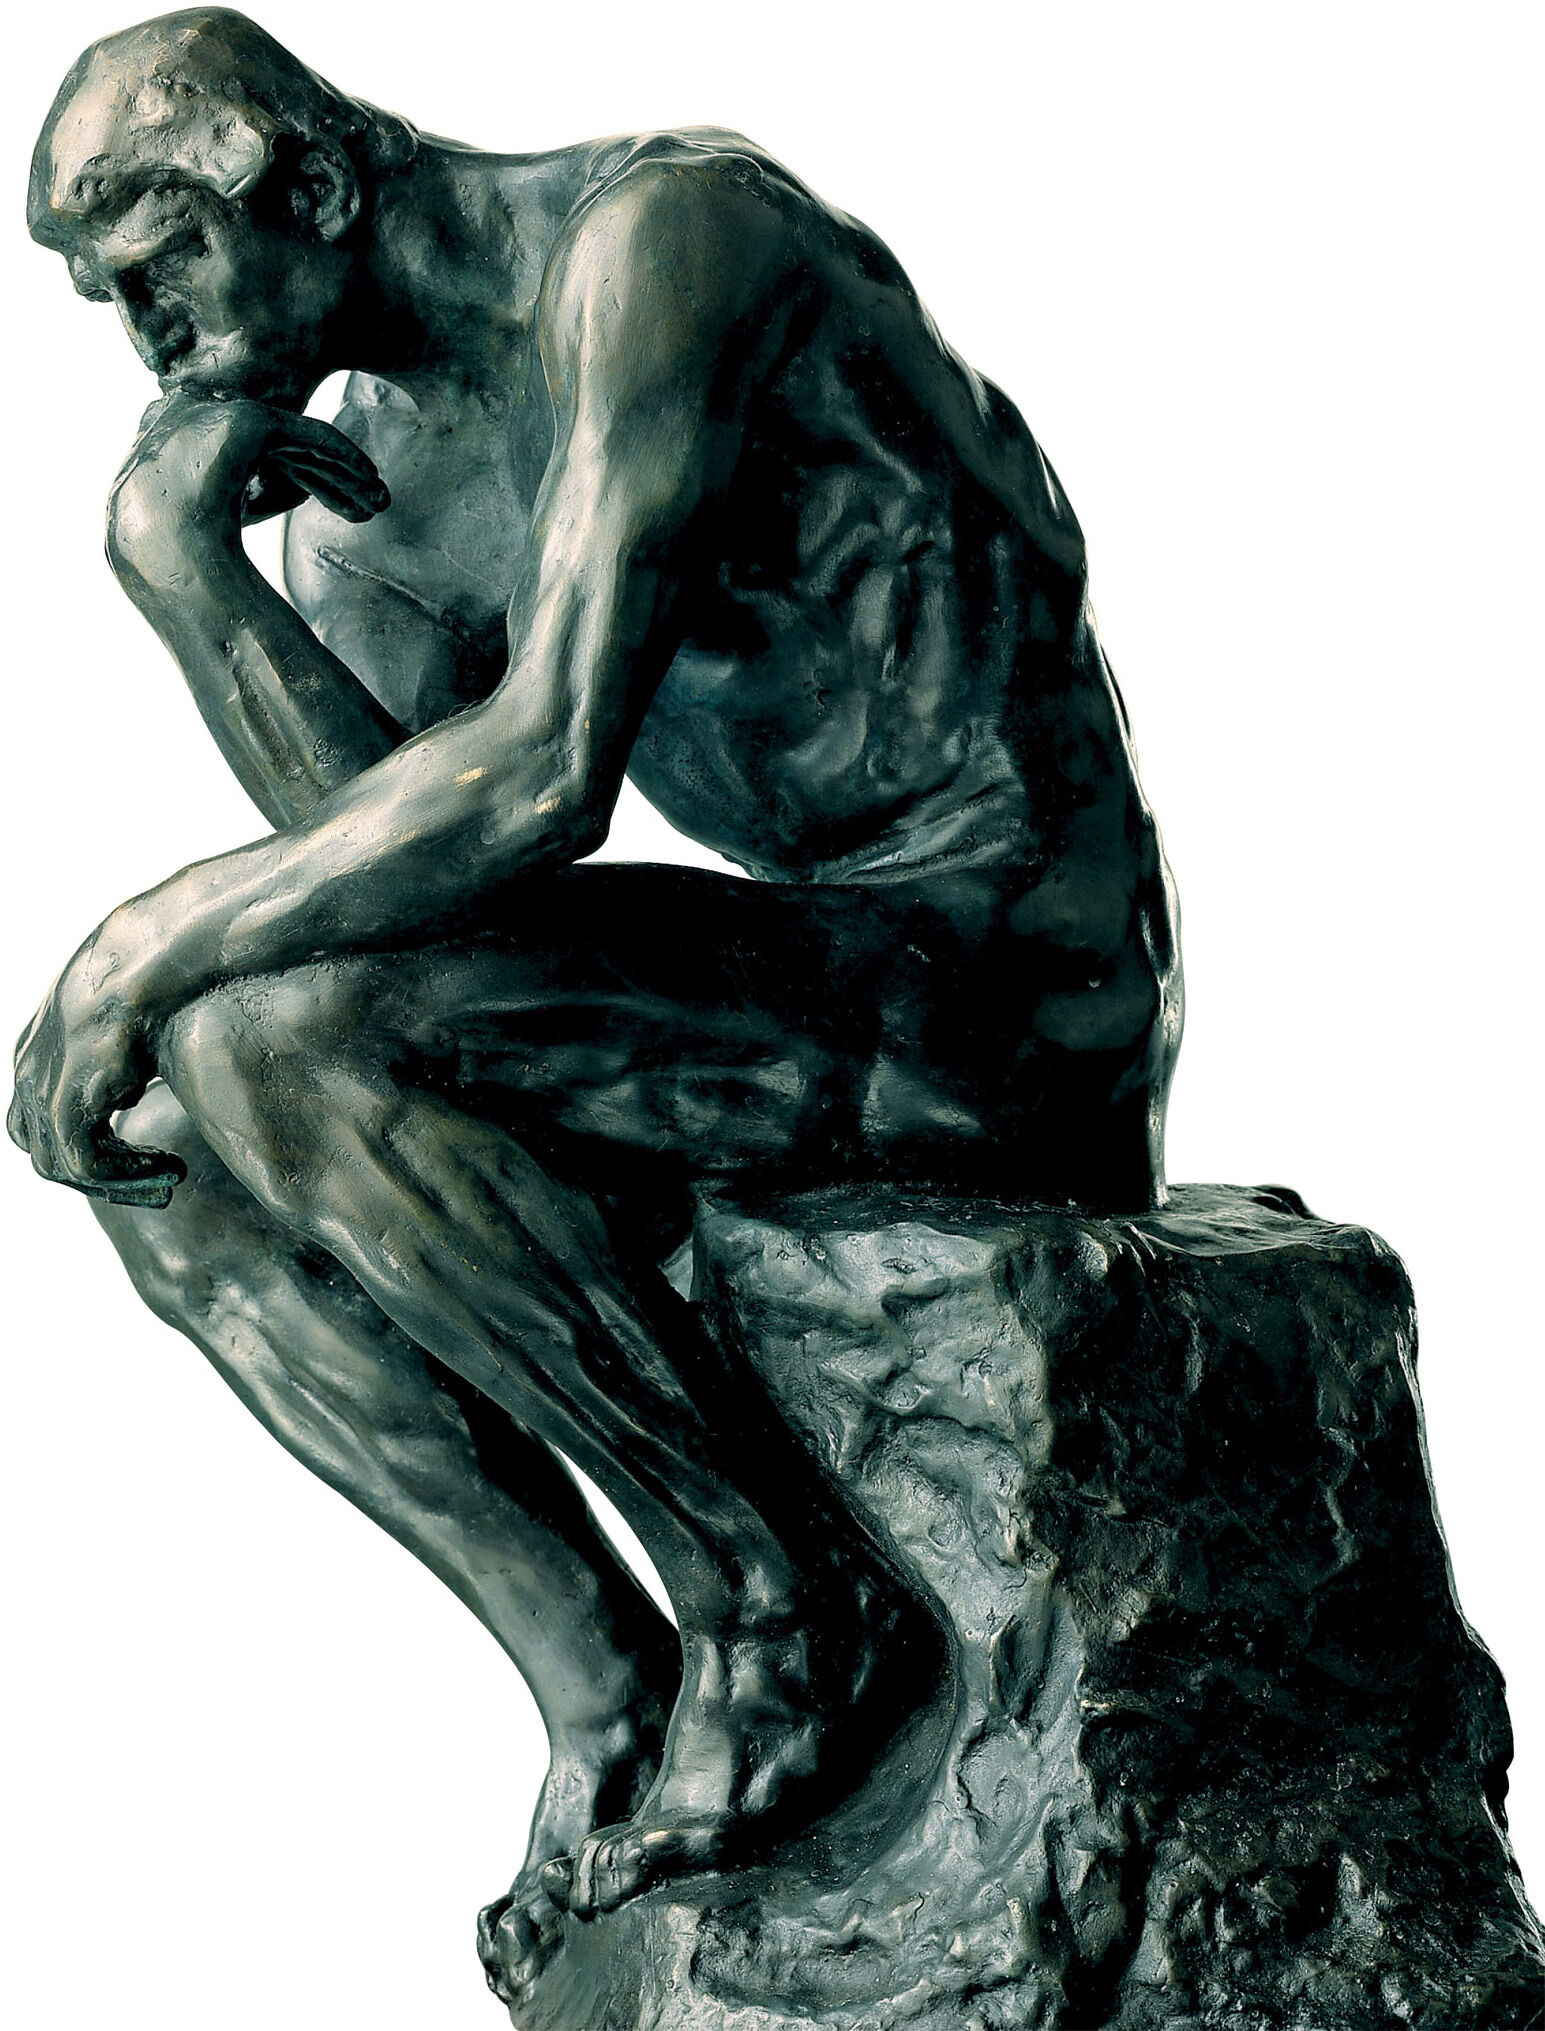 Sculpture "The Thinker" (26 cm), bonded bronze by Auguste Rodin